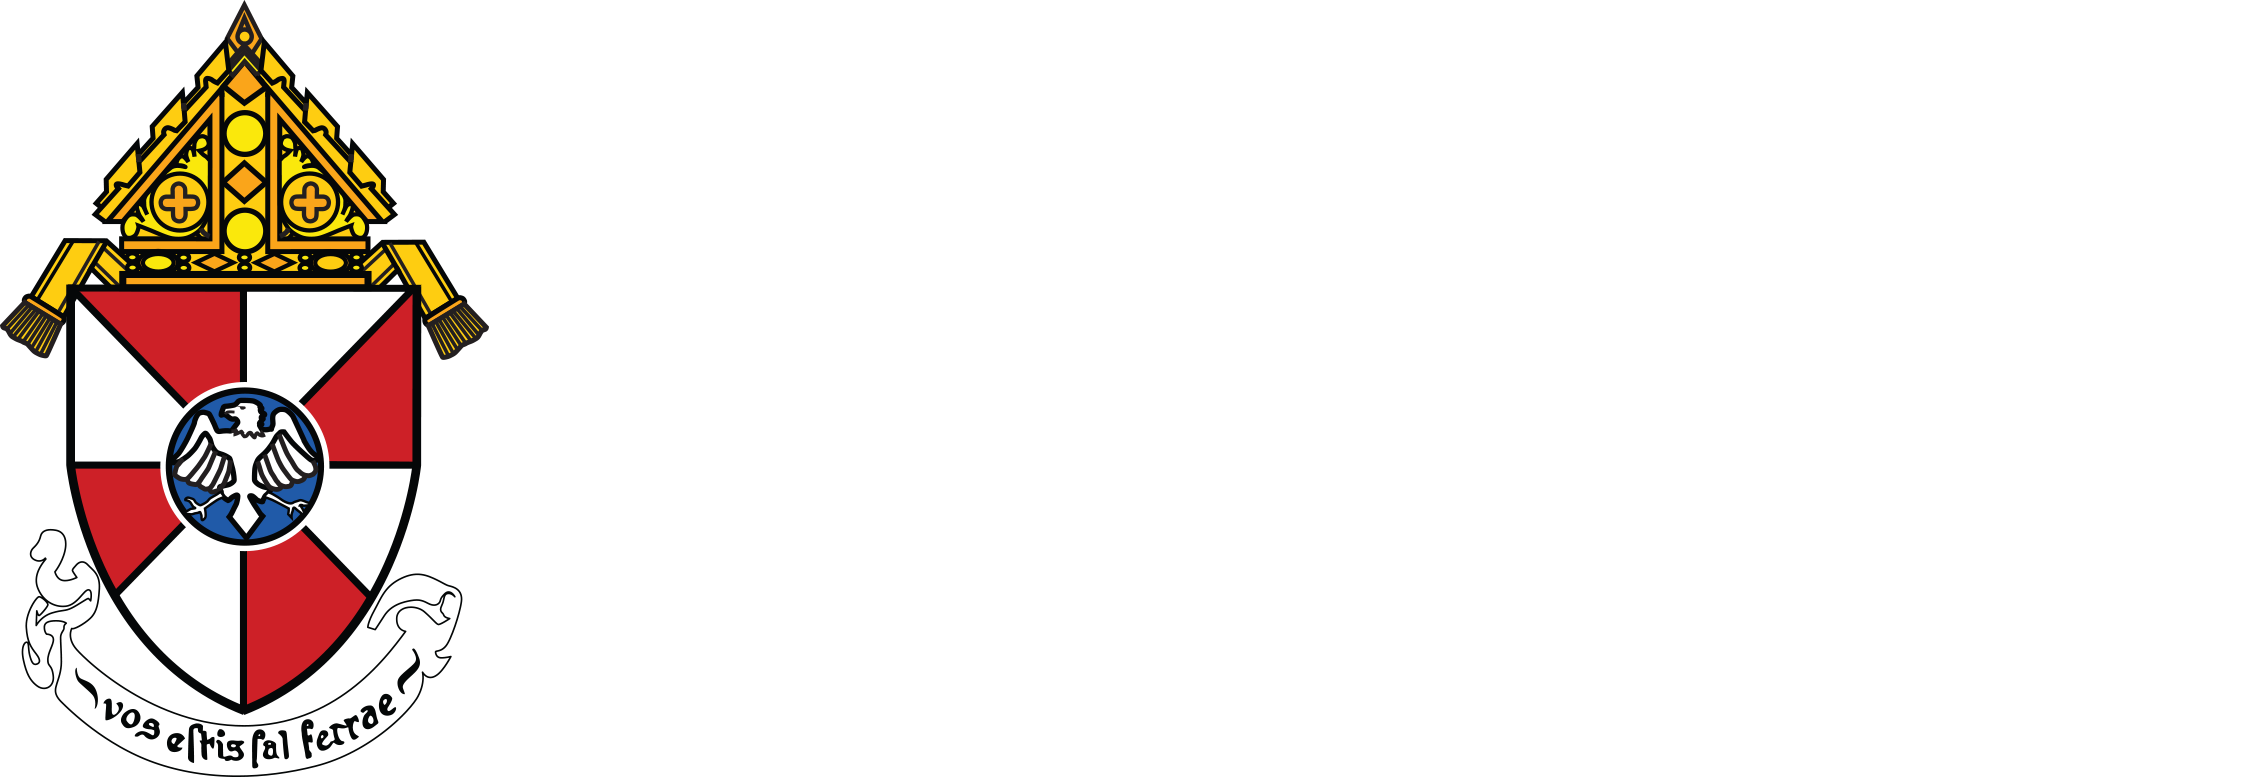 Thinkpriest.org Priesthood in the Archdiocese of Milwaukee: Think Priest